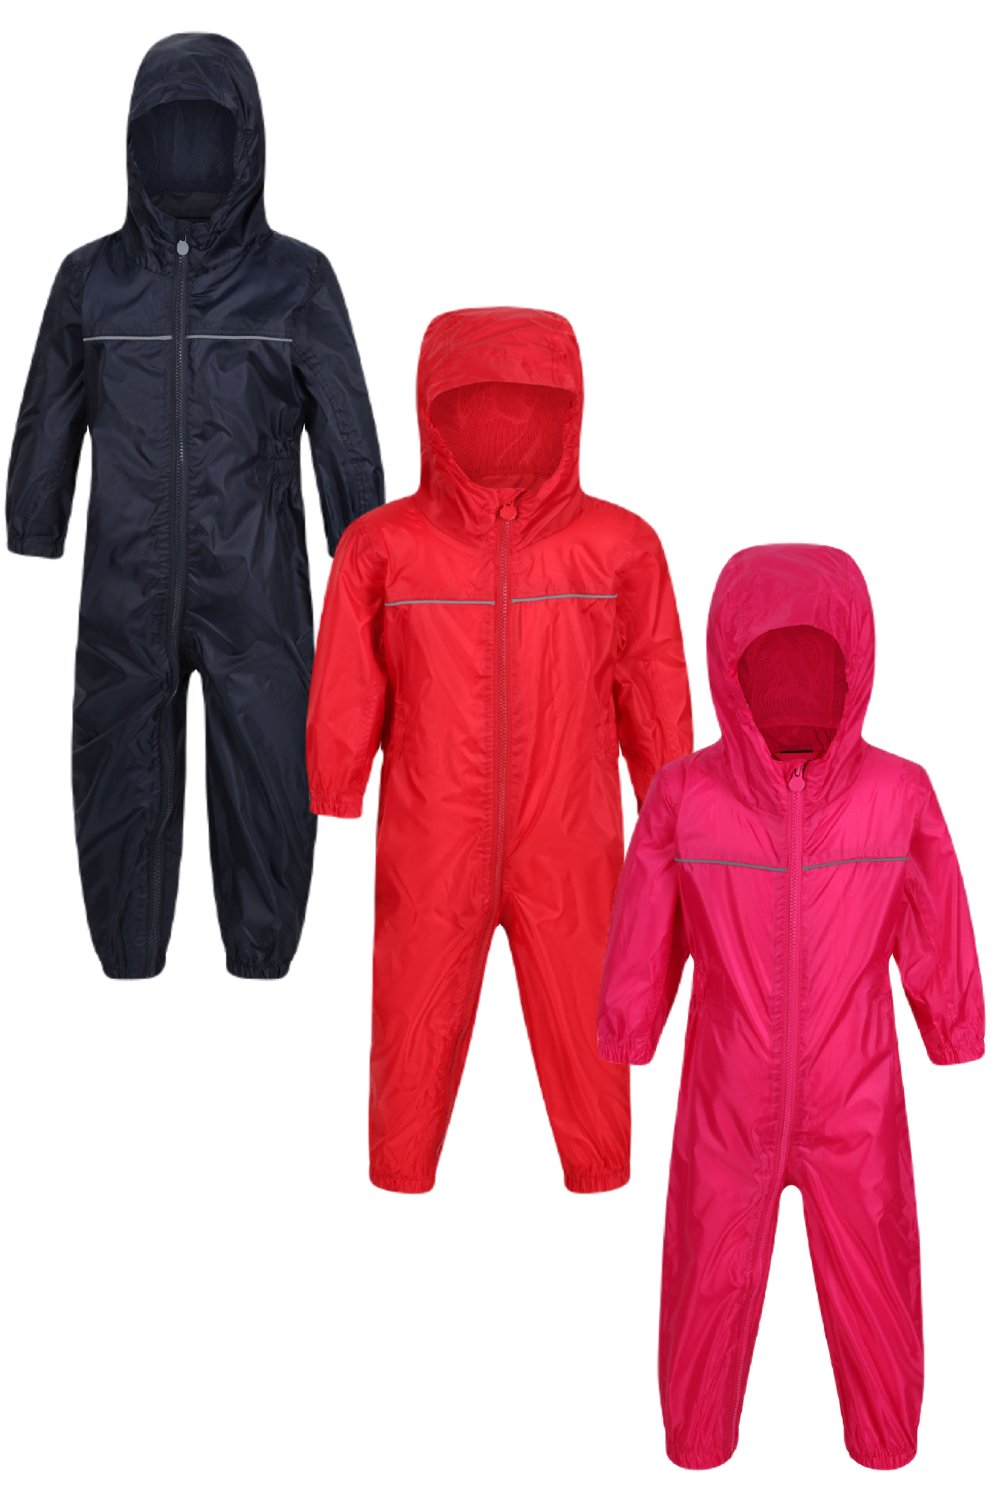 Regatta Kids Breathable Paddle Rain Suit In Navy, Classic Red and Jem